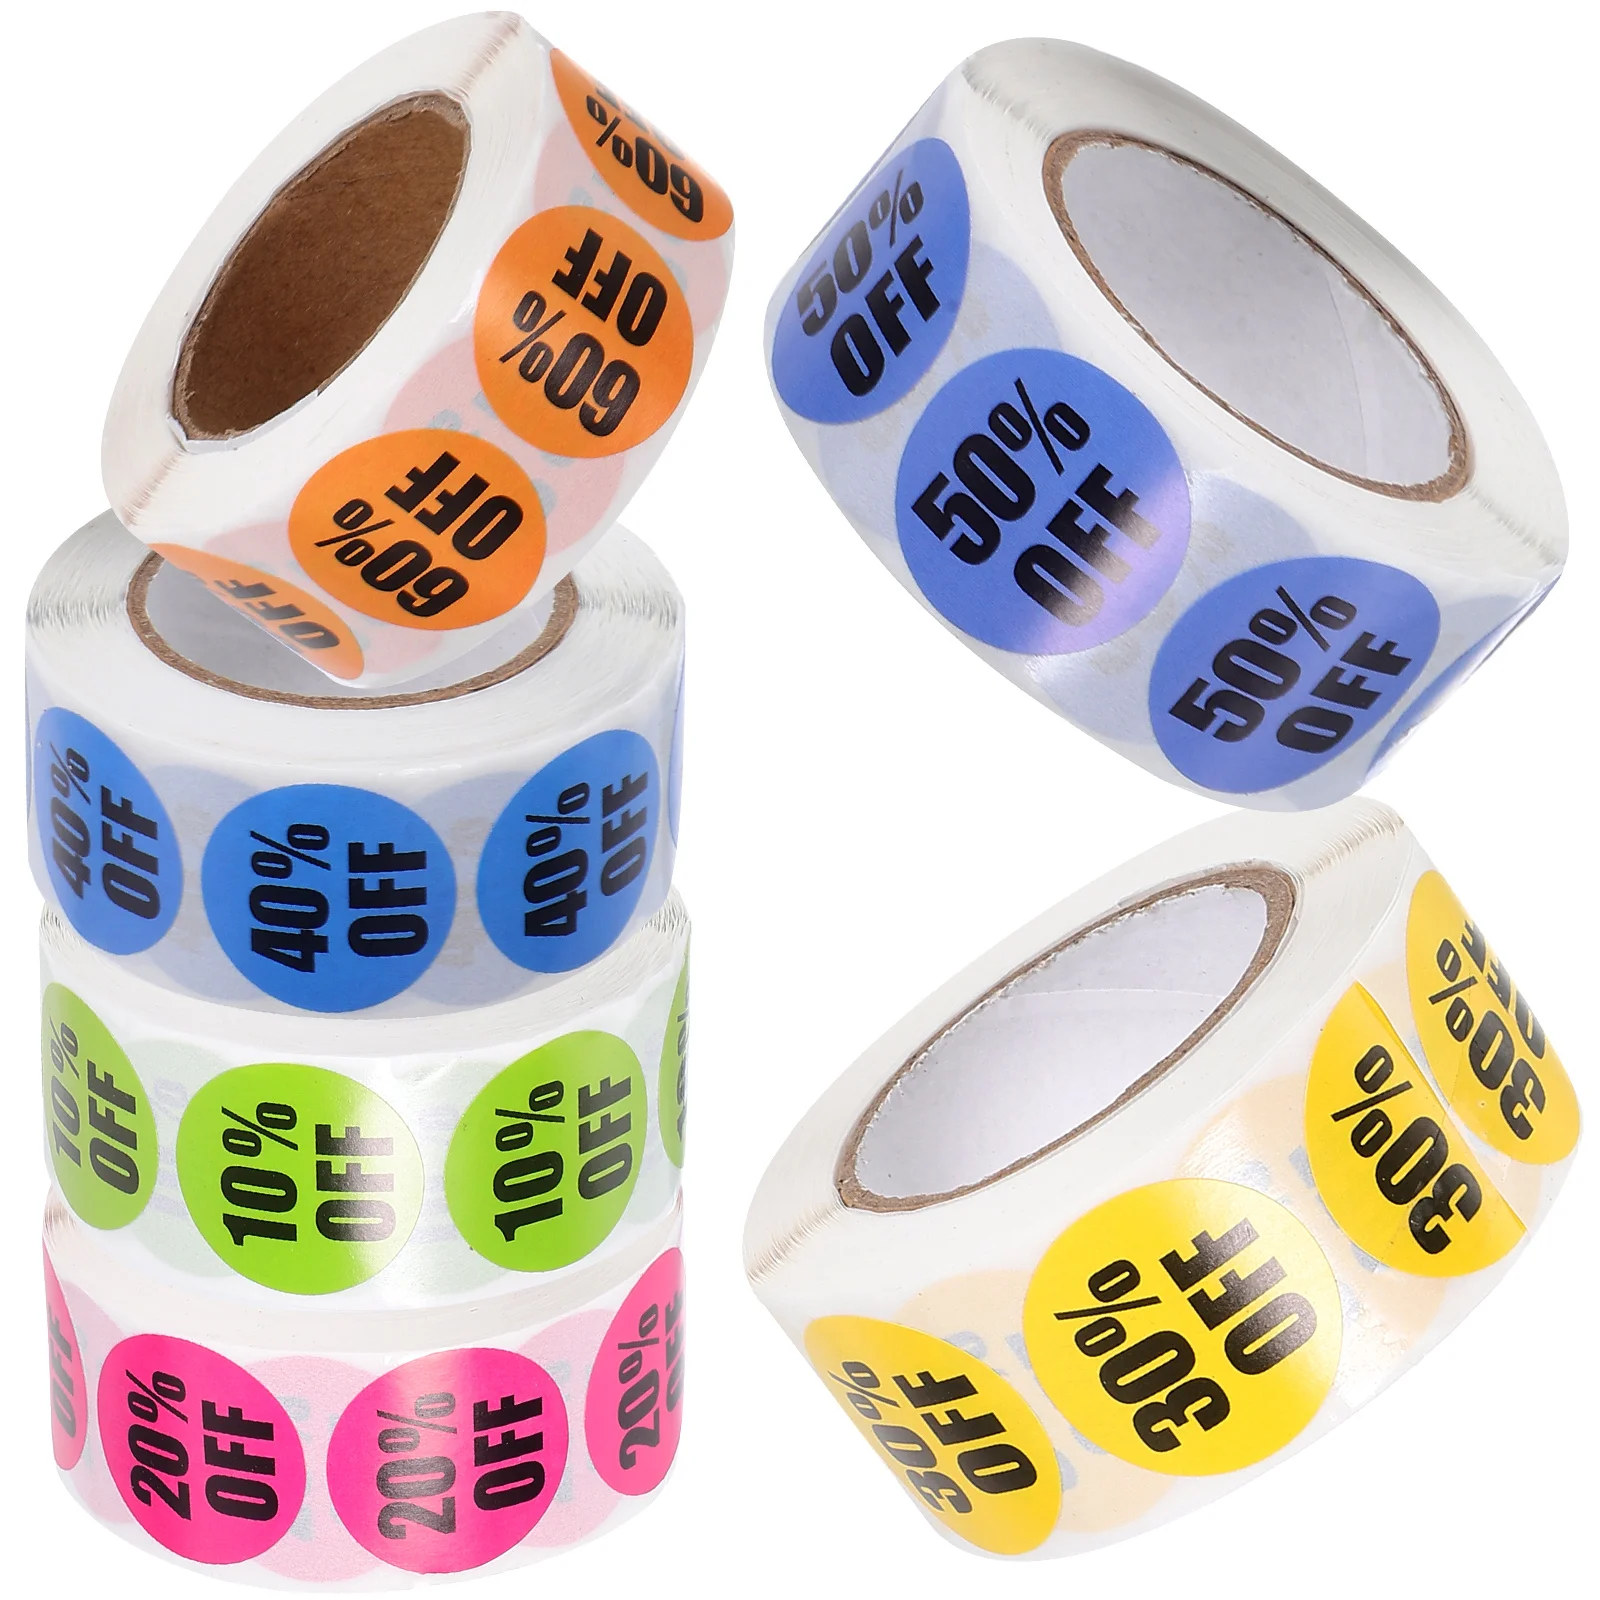 

6 Rolls Tag Price Stickers Round Discount Label Self-adhesive Labels Coated Paper Tags Retail Store